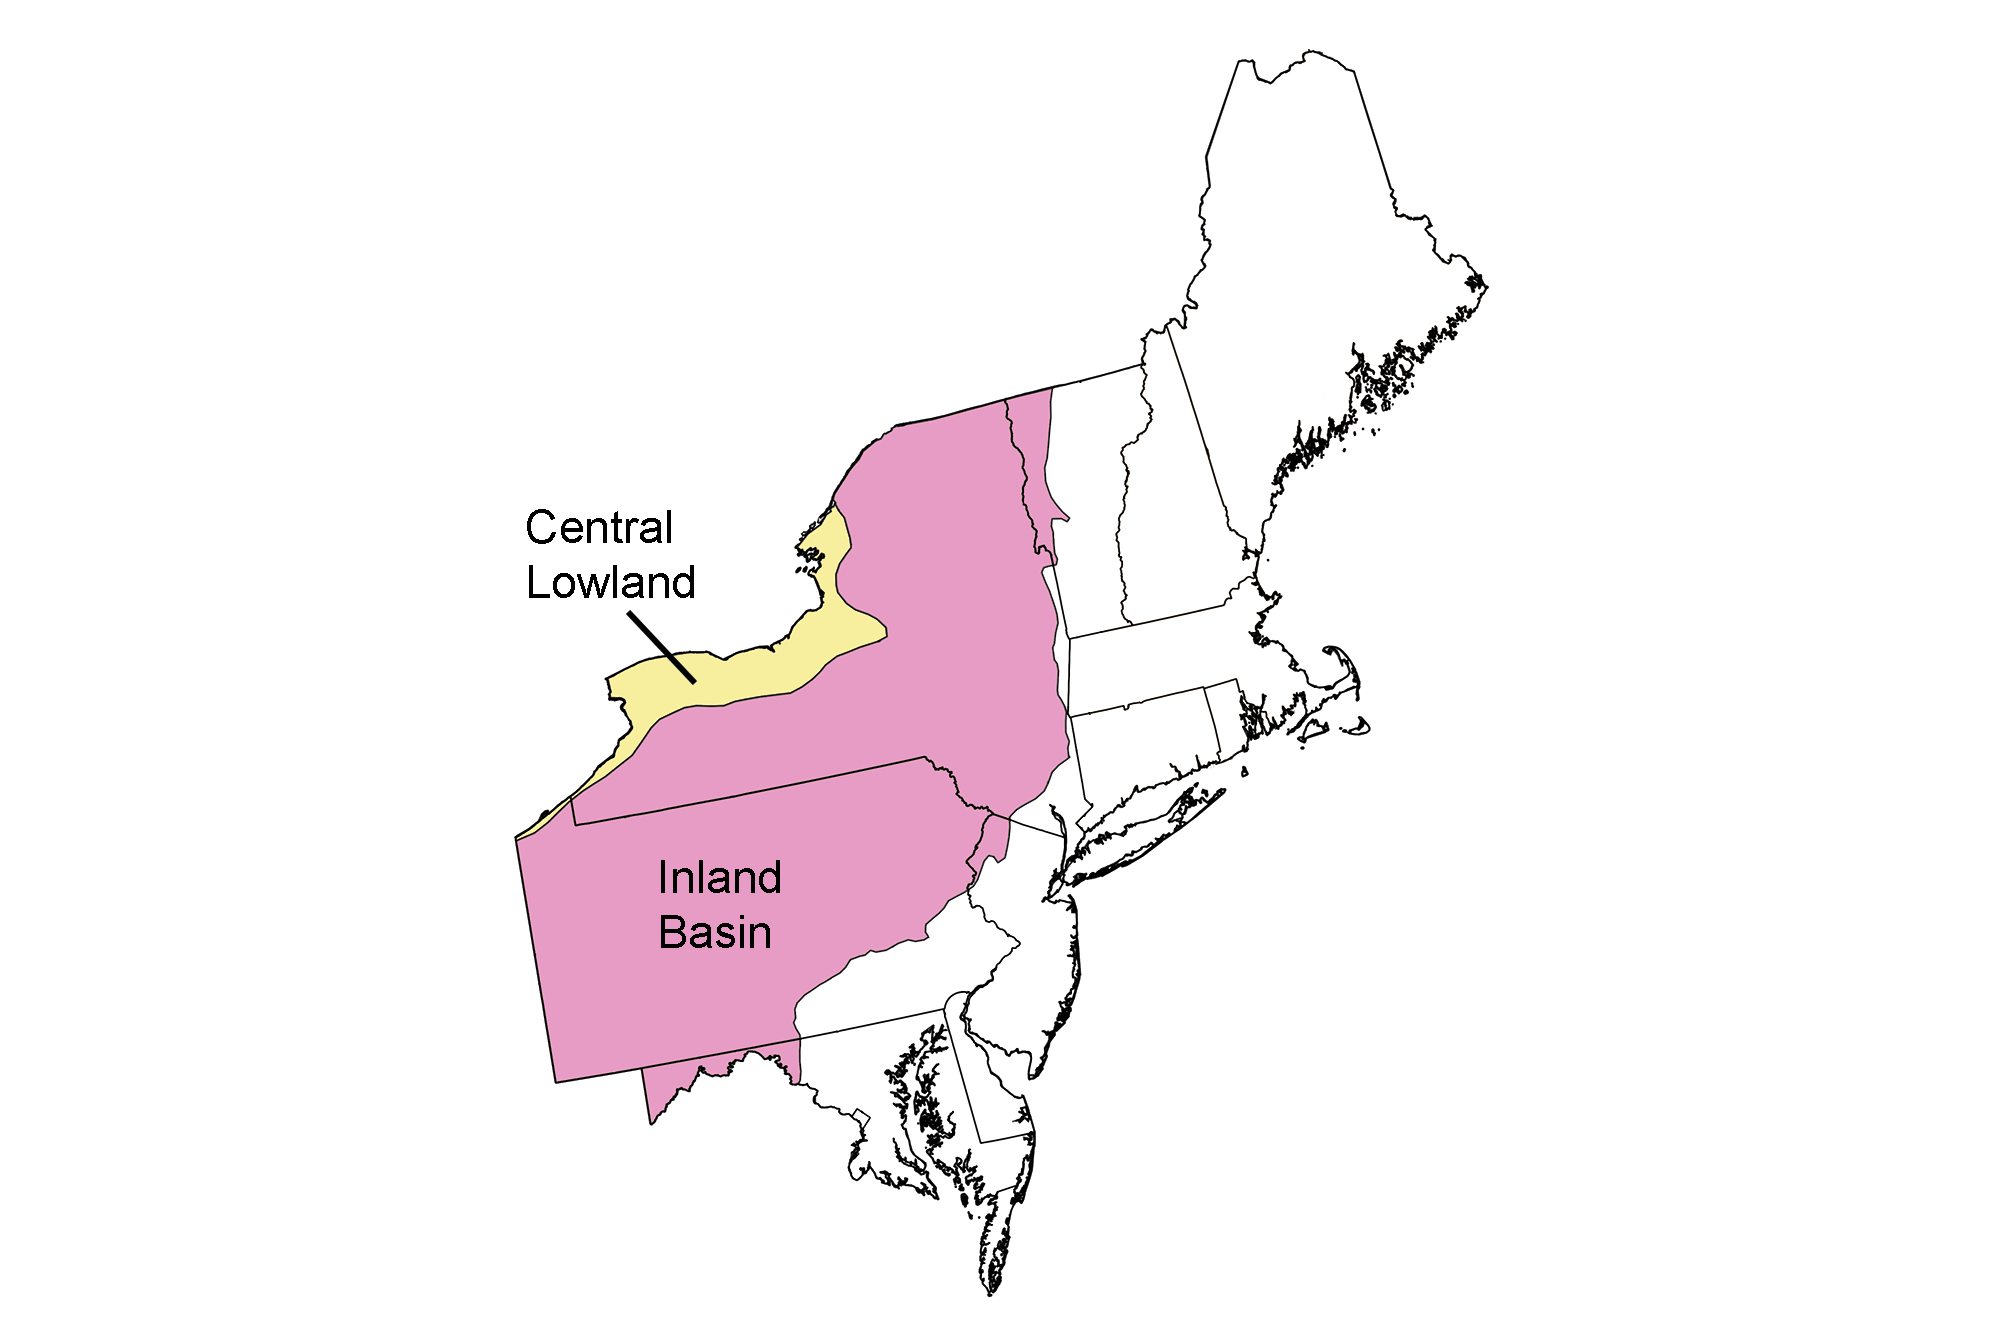 Simple map highlighting the Central Lowland and Inland Basin regions of the northeastern United States.